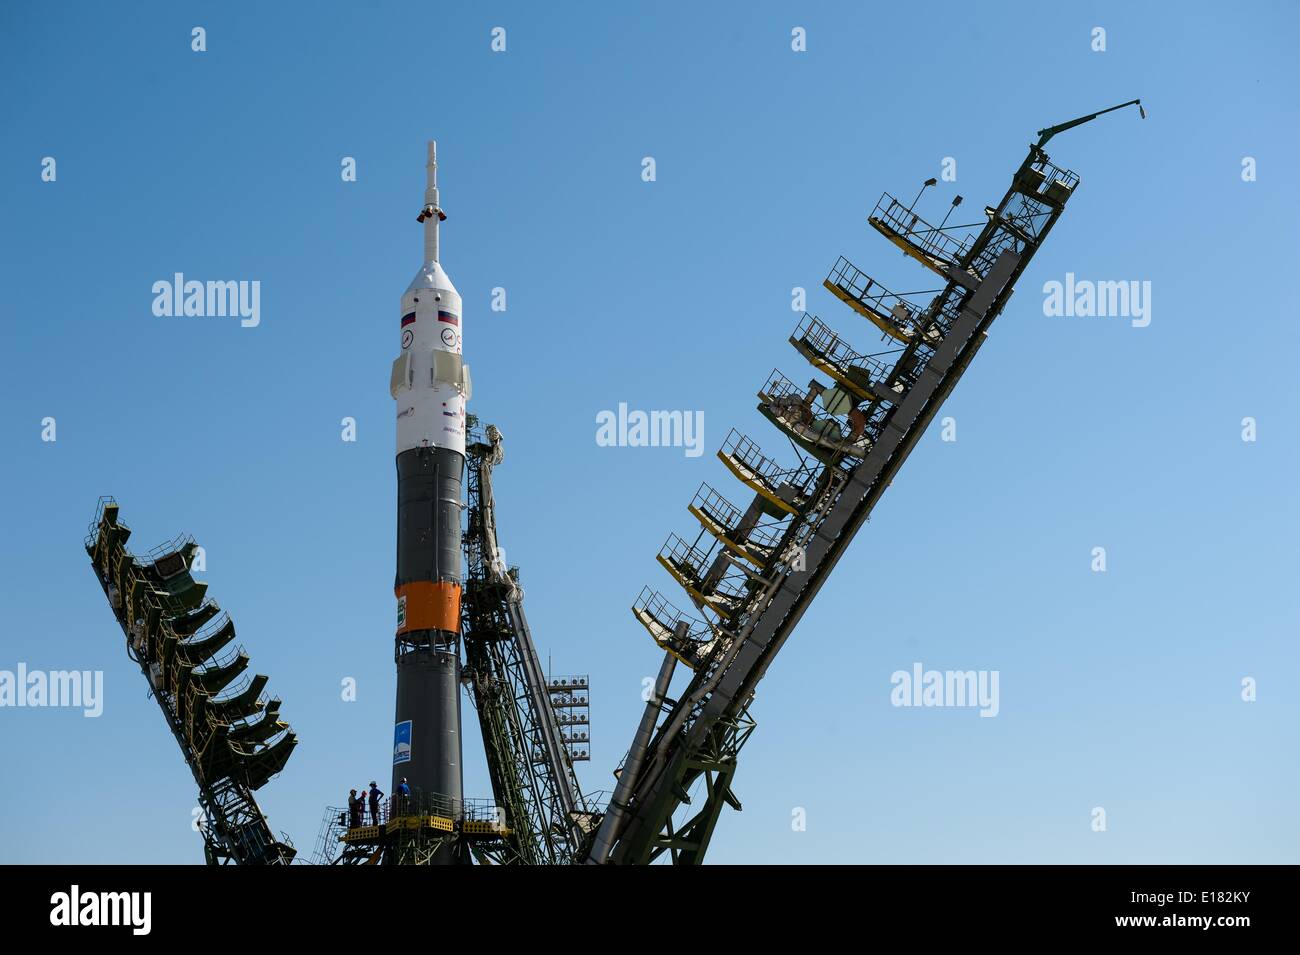 The Roscosmos Soyuz TMA-13M spacecraft is moved into vertical position as the gantry is closed on the launch pad in preparation for launch to the International Space Station May 26, 2014 at the Baikonur Cosmodrome in Kazakhstan. Stock Photo